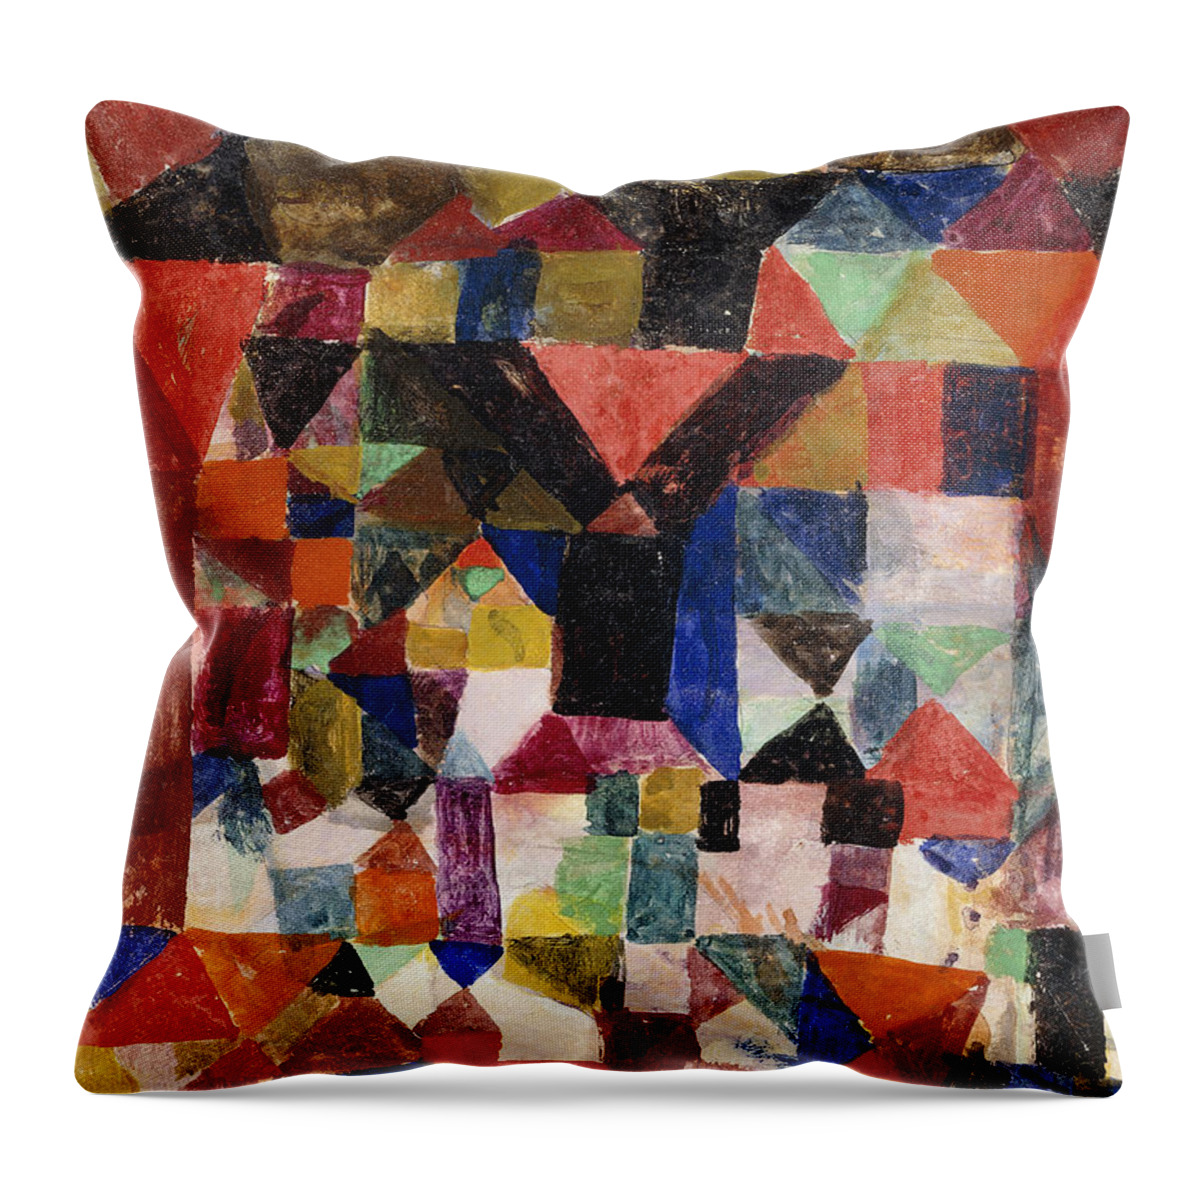 Paul Throw Pillow featuring the painting Stadtartiger Building; Stadtartiger Aufbau, 1917 Tempera And Watercolour On Card by Paul Klee